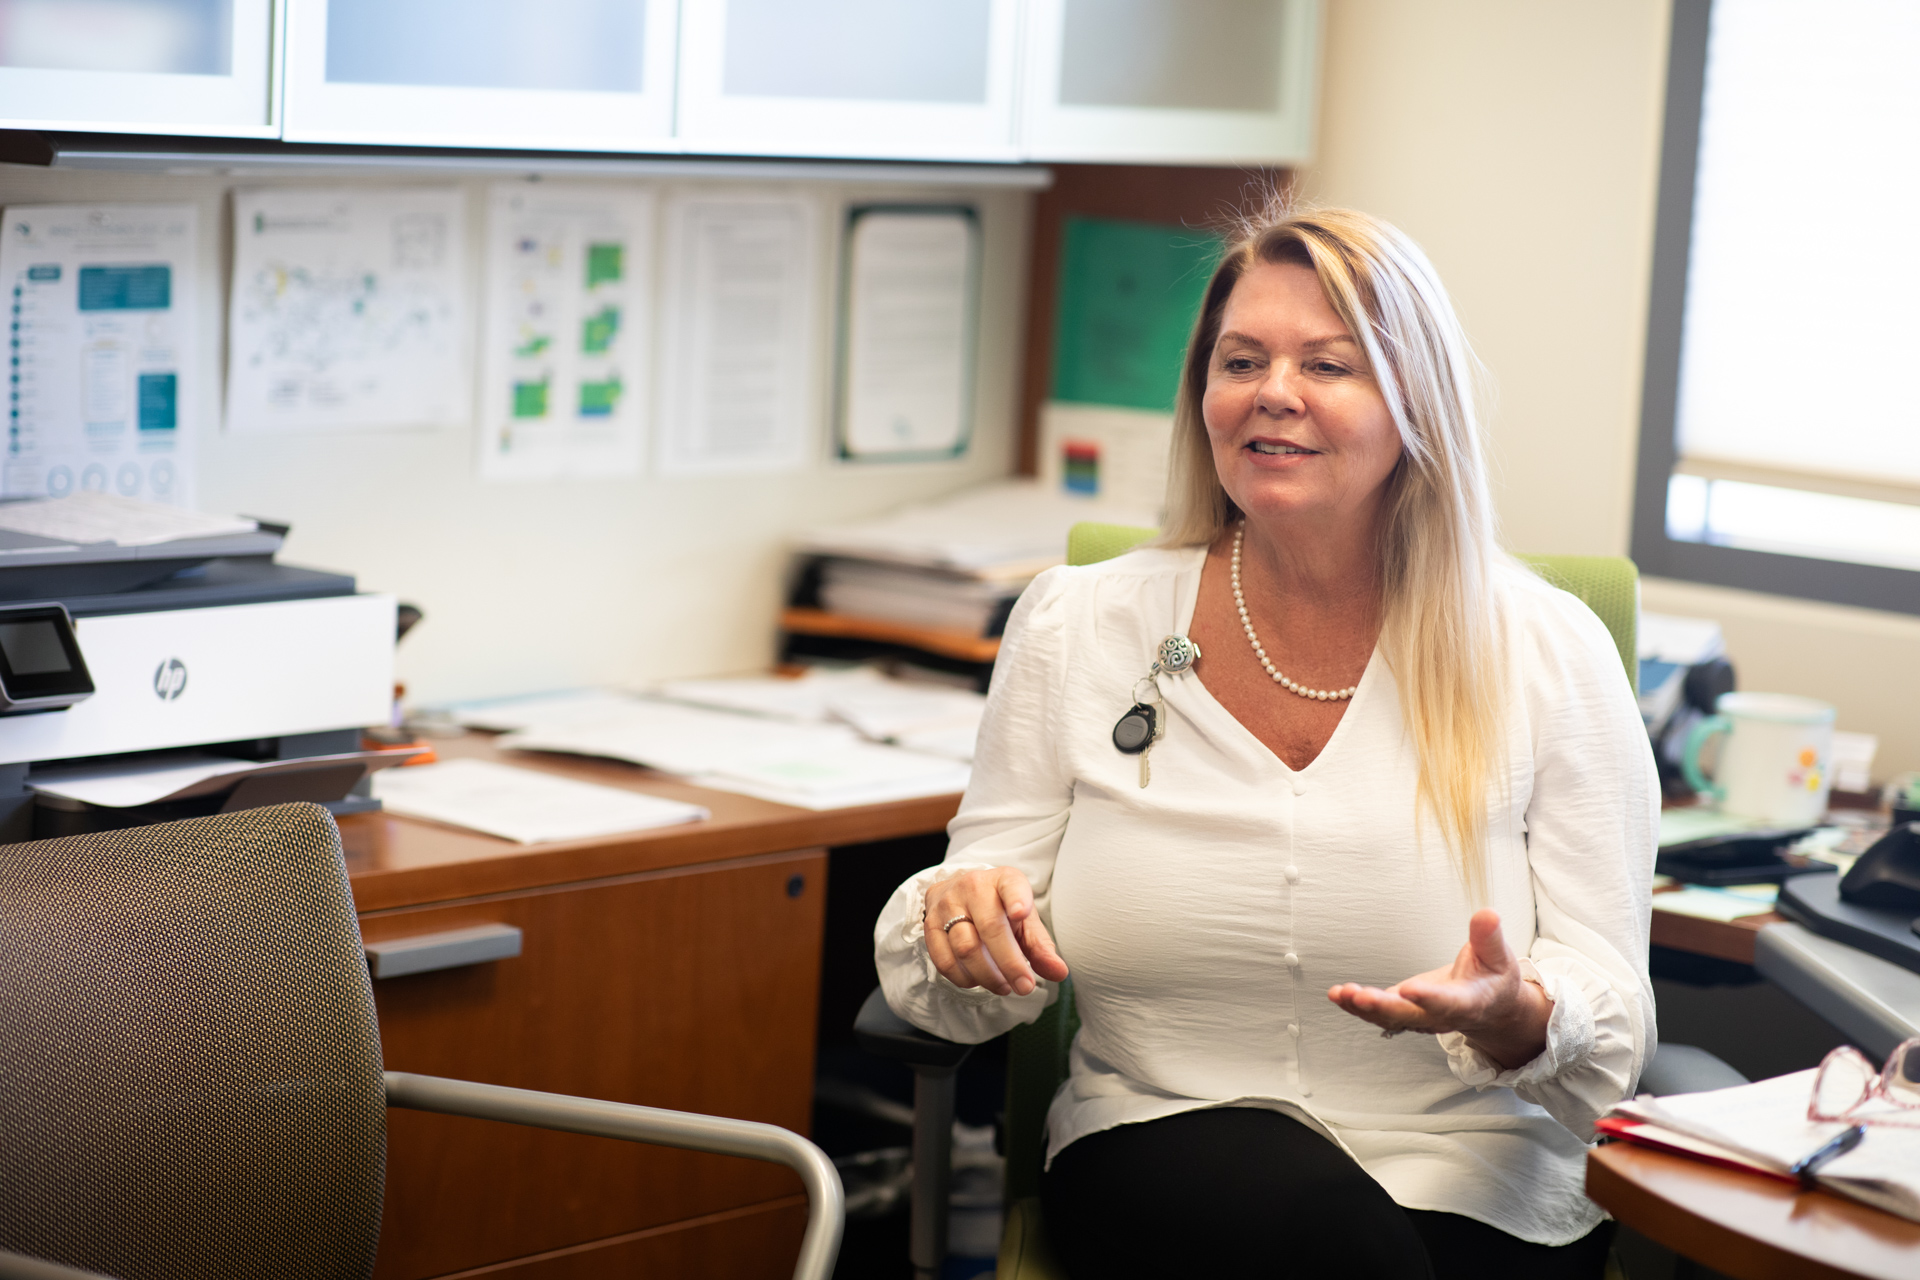 Jeanne Harris Van Dahlen, new student health director, explains her vision while sitting at her desk in her campus office.